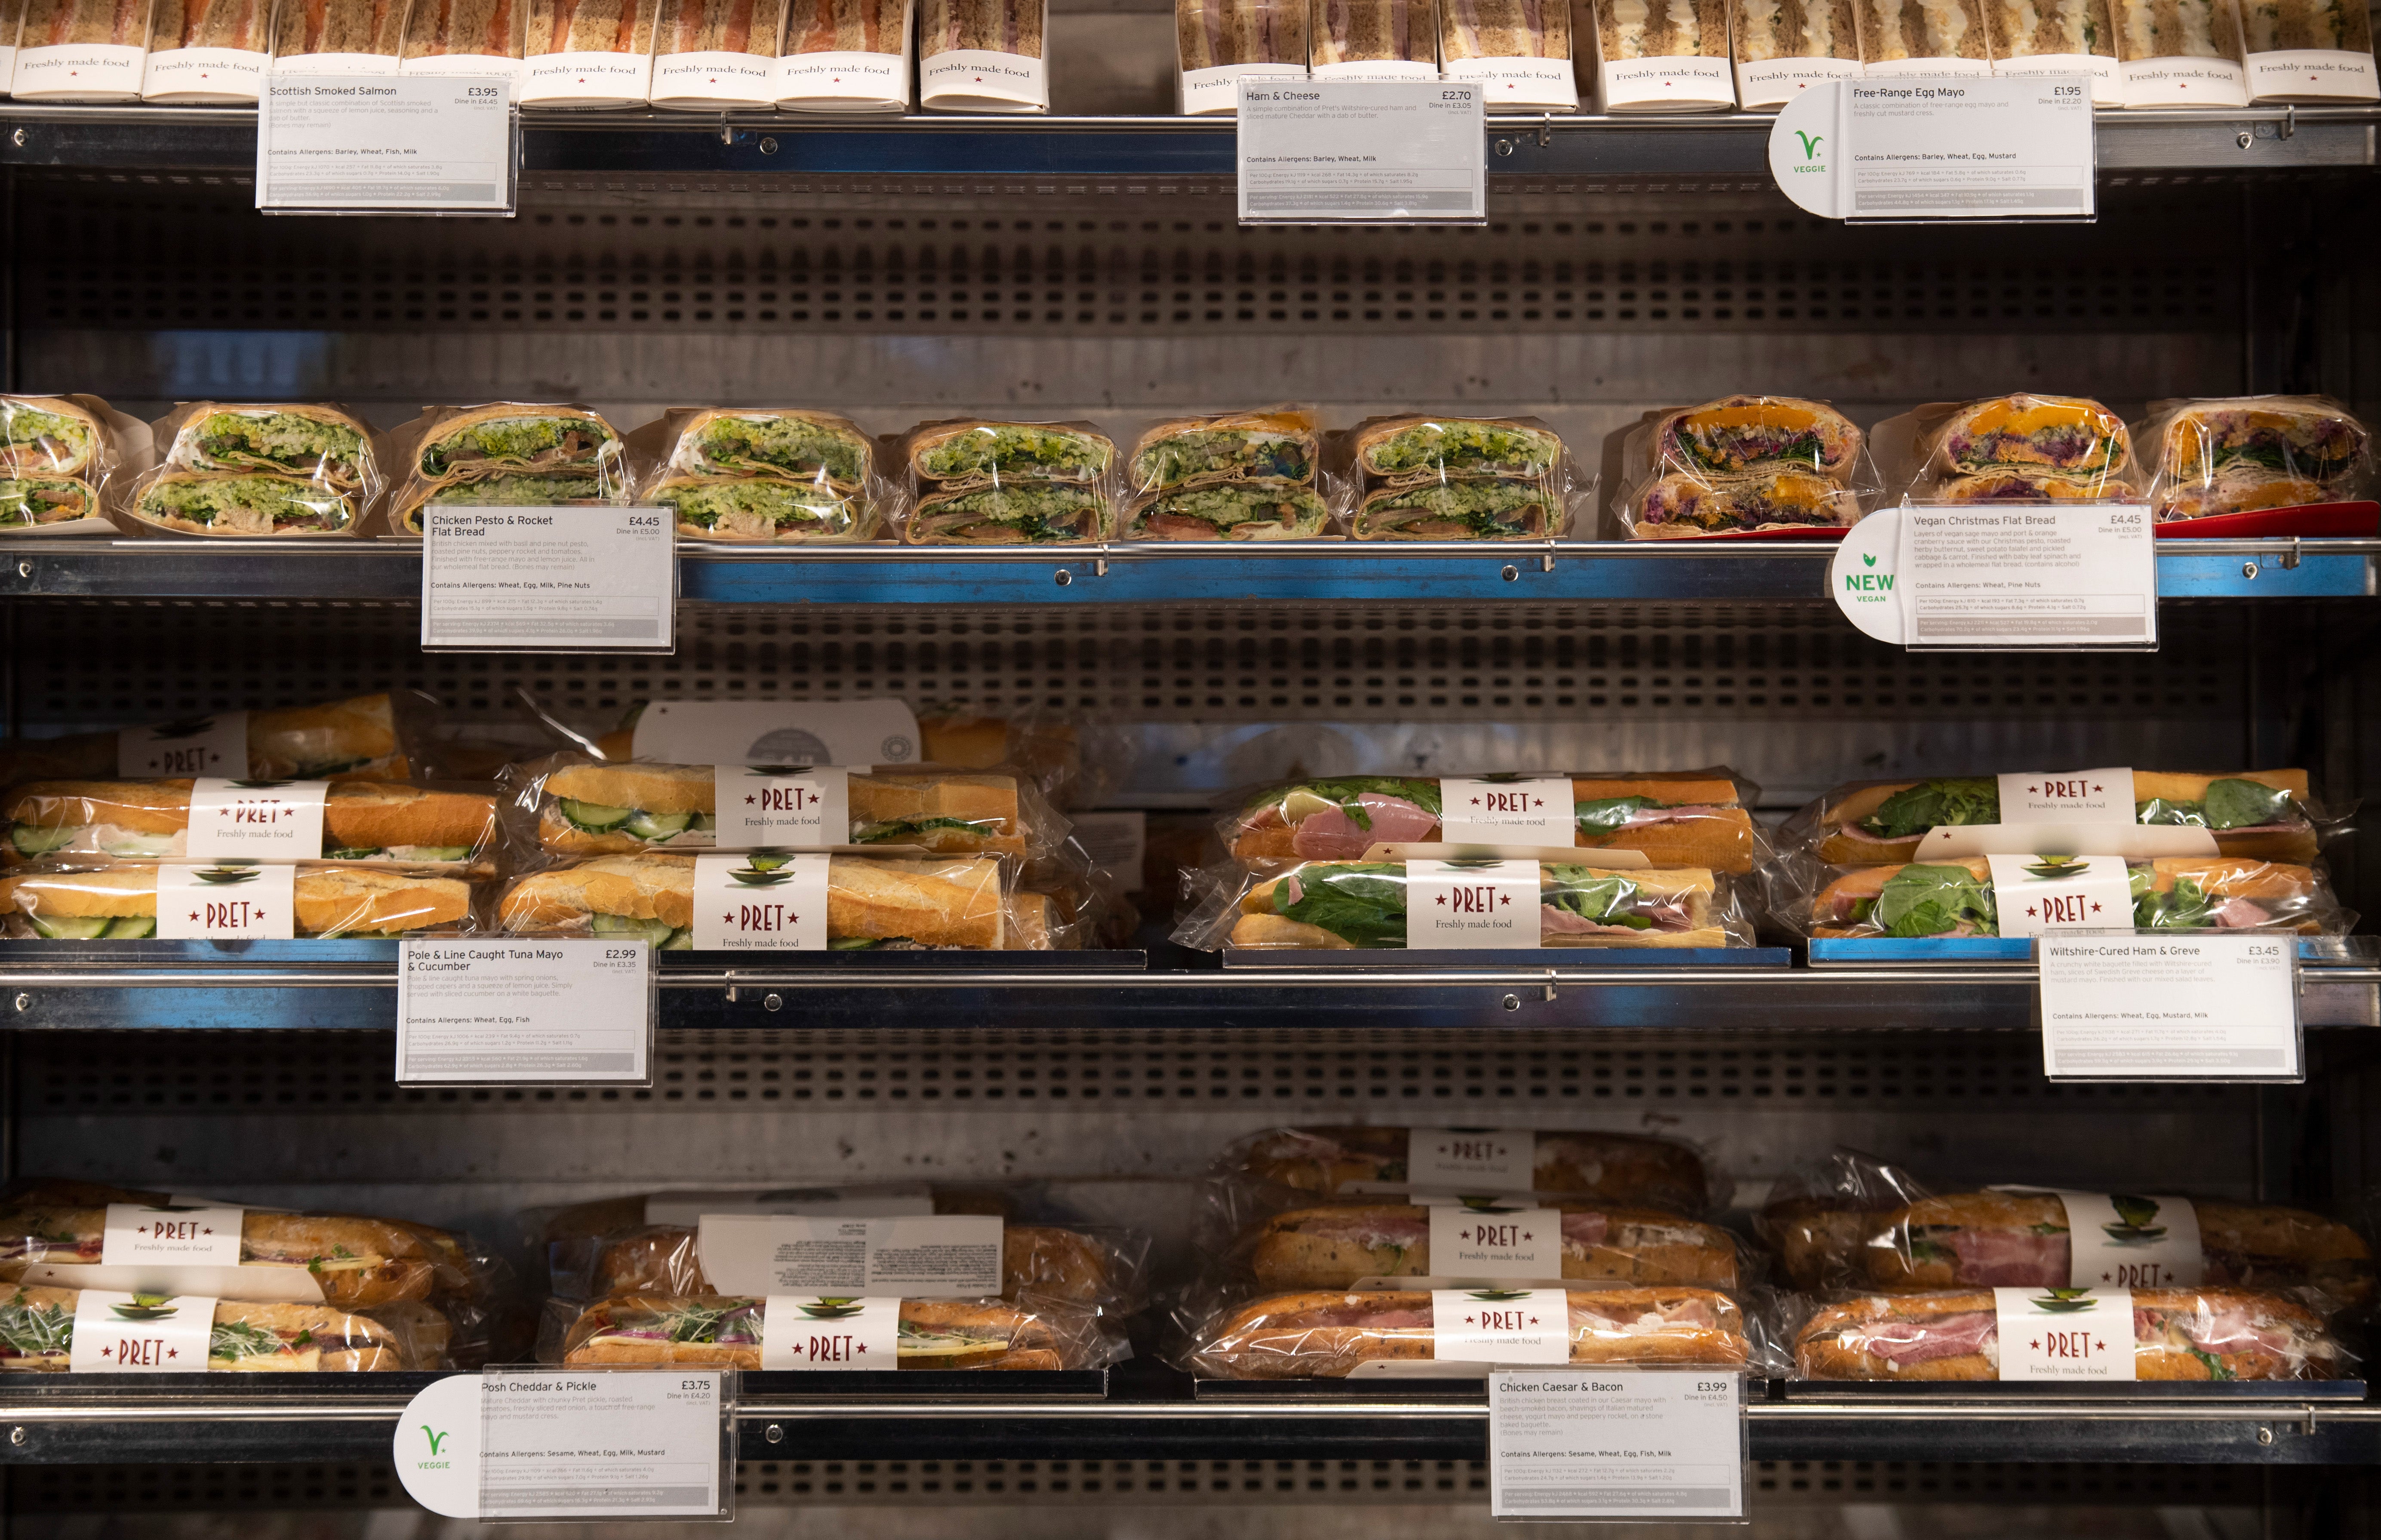 Pret has 419 stores across the UK and 76 varieties of sliced bread sandwiches, baguettes and rolls across the Pret and Veggie Pret menus